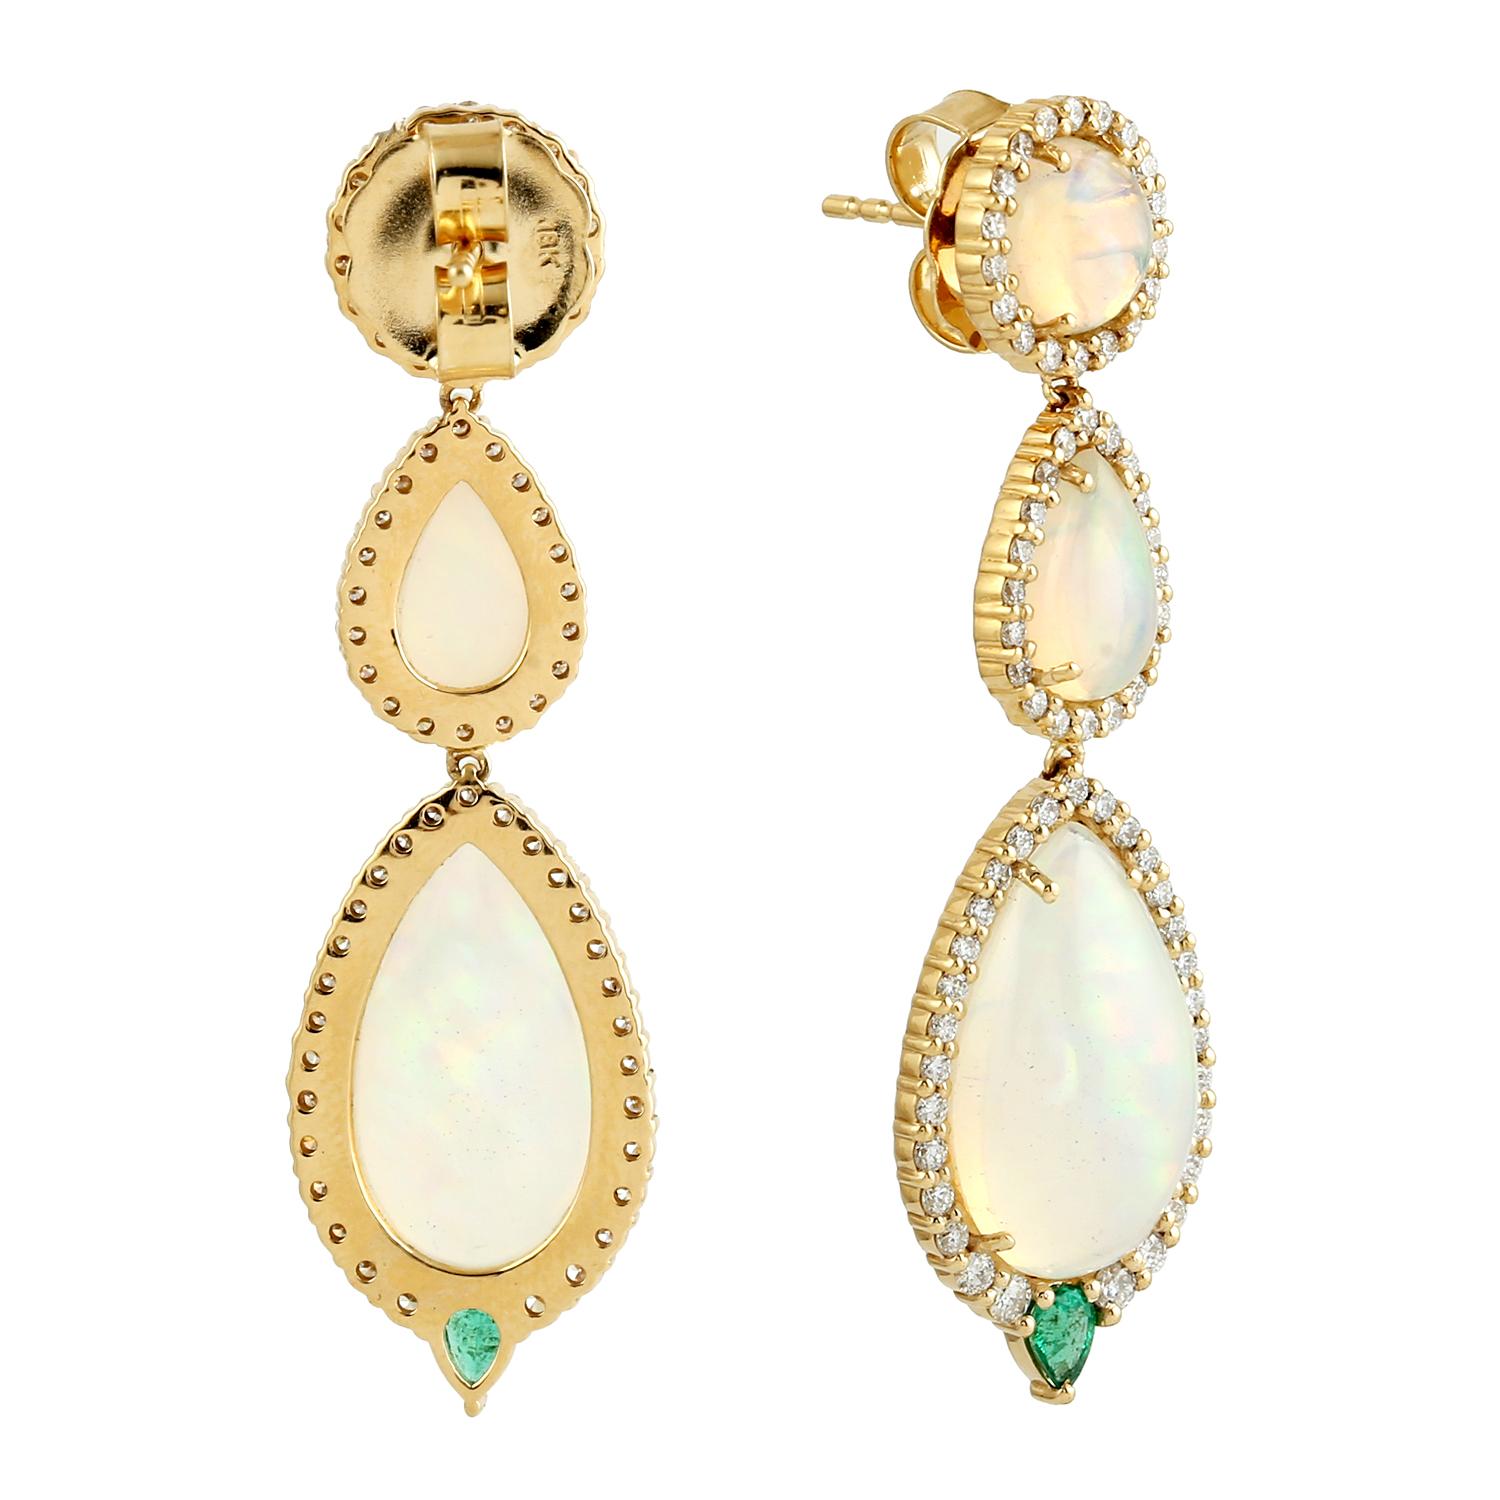 Art Deco 3 Tier Ethiopian Opal Dangle Earrings With Emerald Made In 18k Yellow Gold For Sale